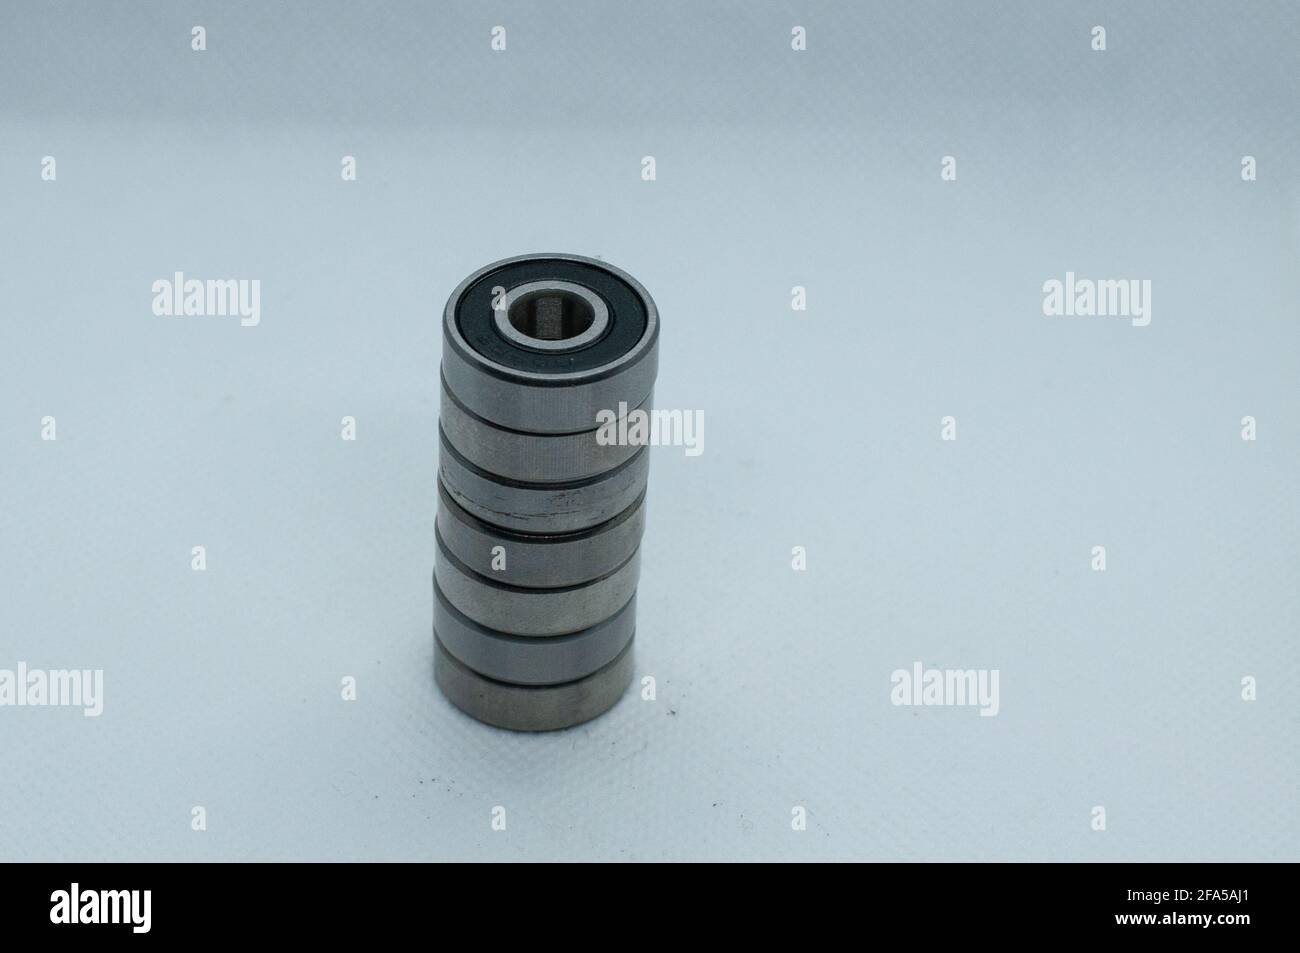 Closeup of ball bearings stacked on top of each other on a plain white background Stock Photo